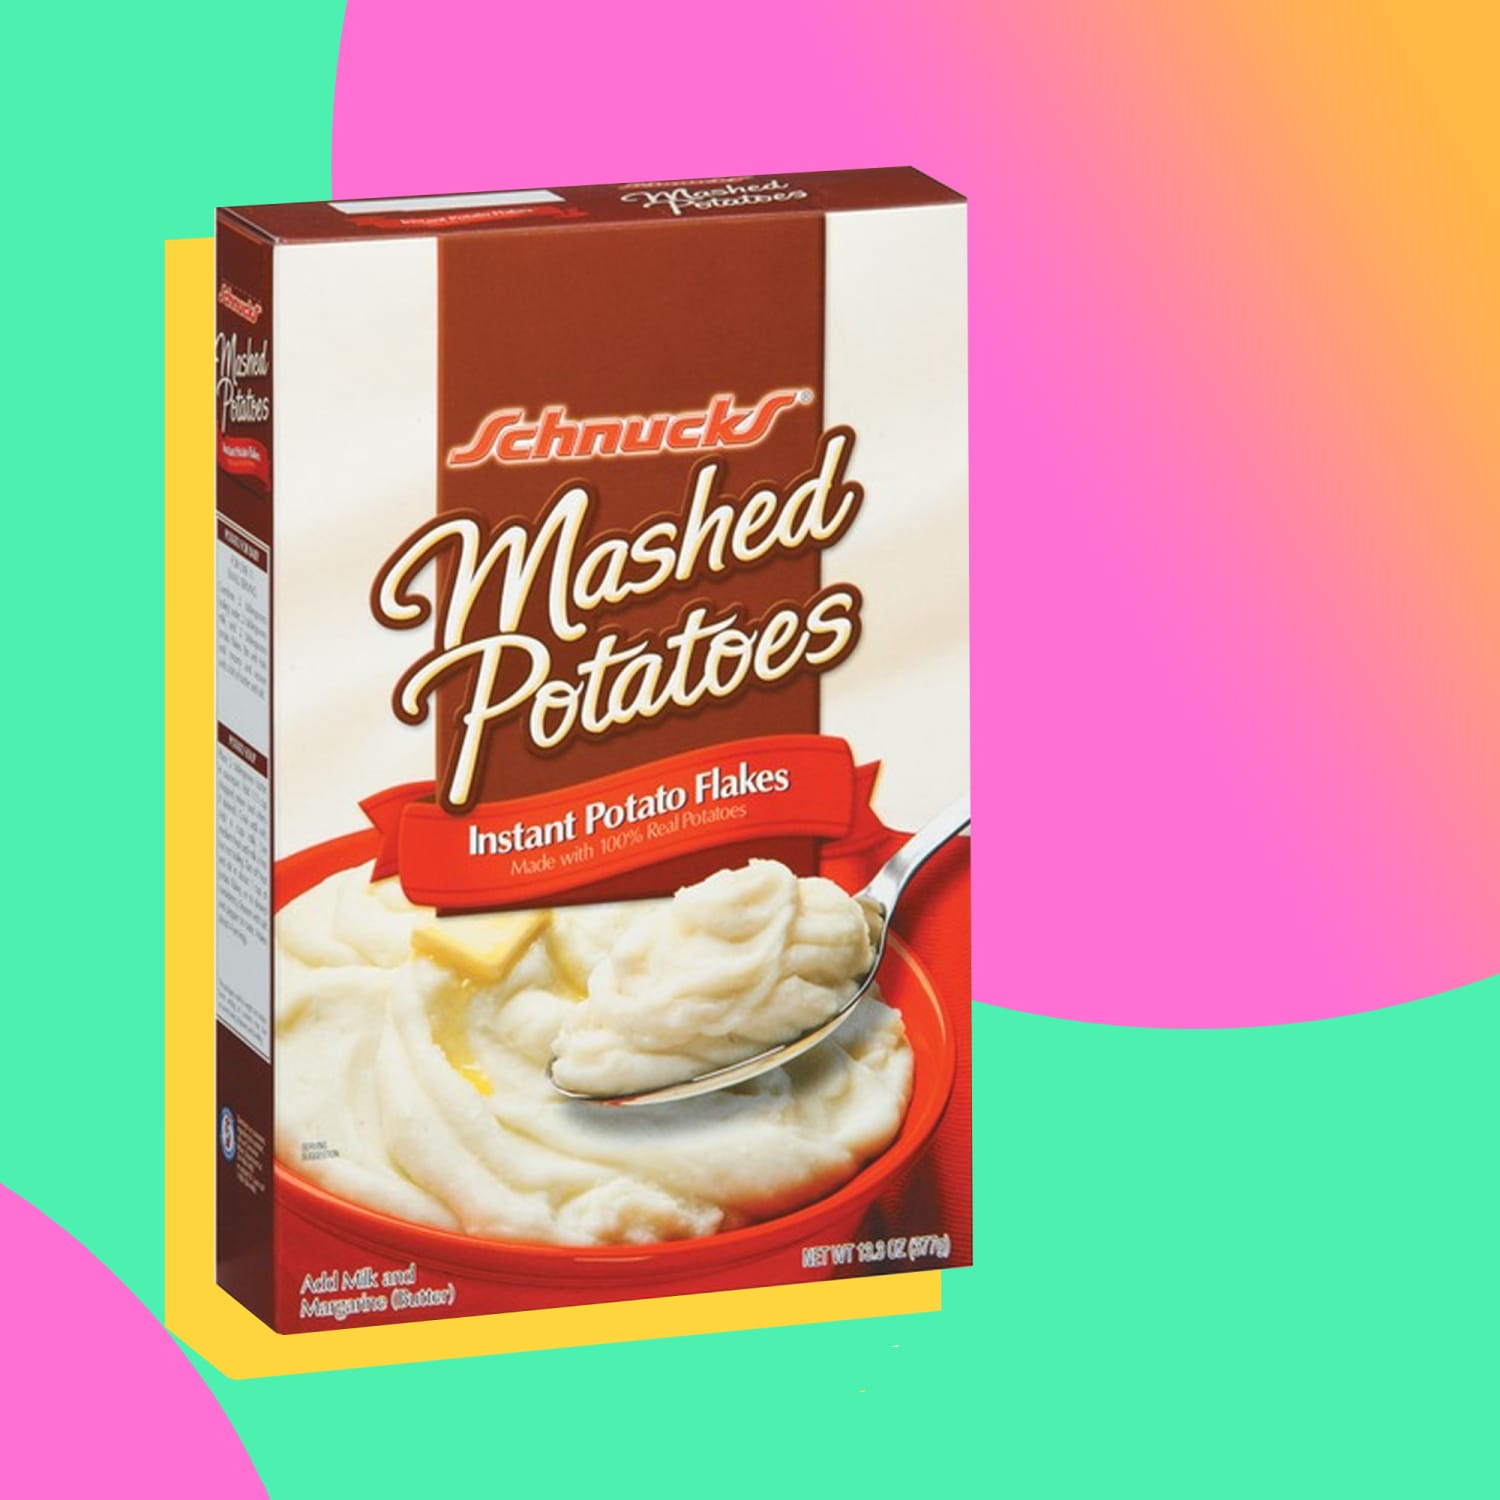 What Are Instant Mashed Potato Flakes Made Of?